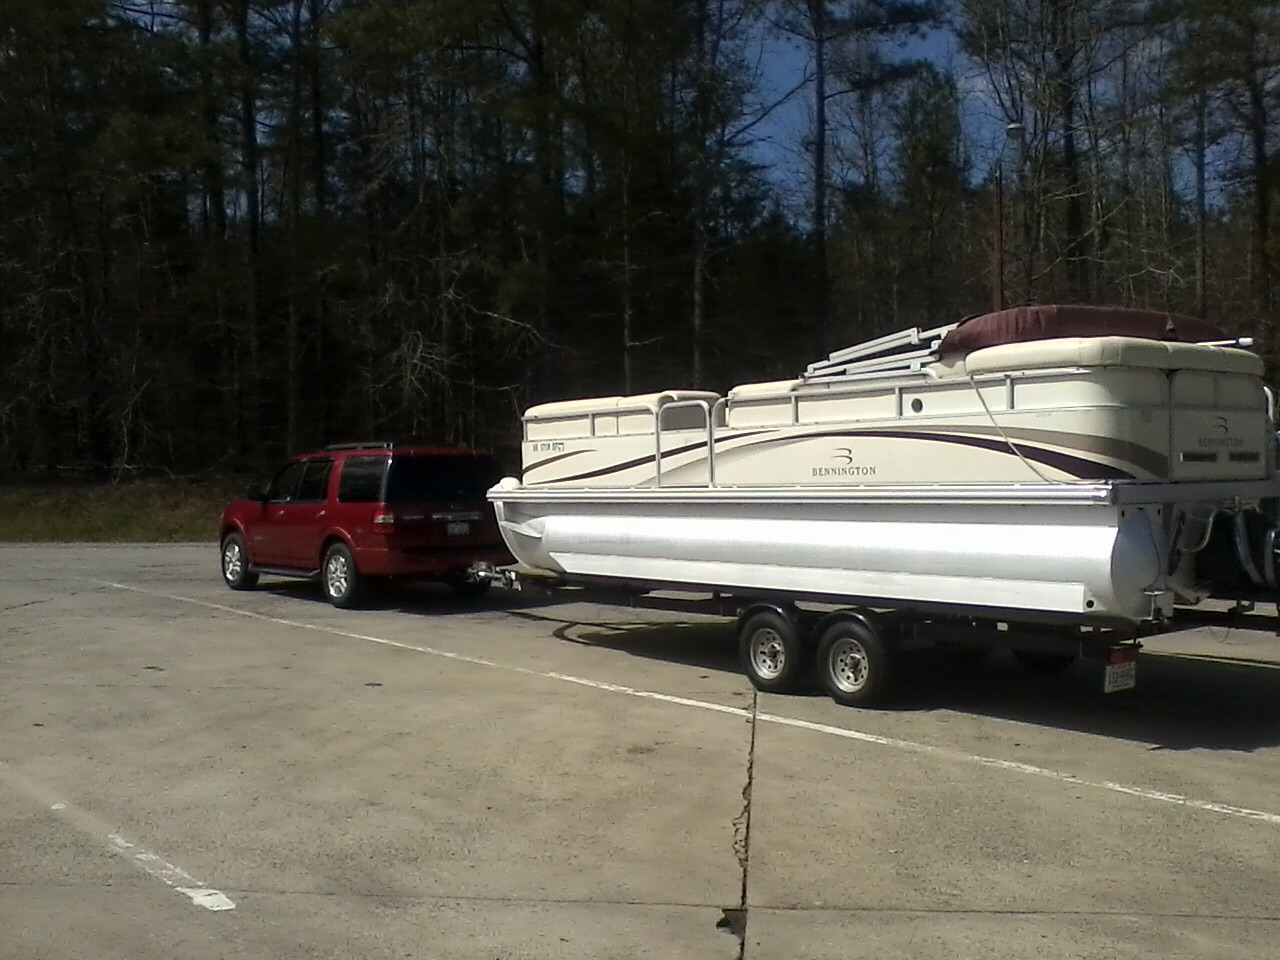 Enroute to Lake Norman.....